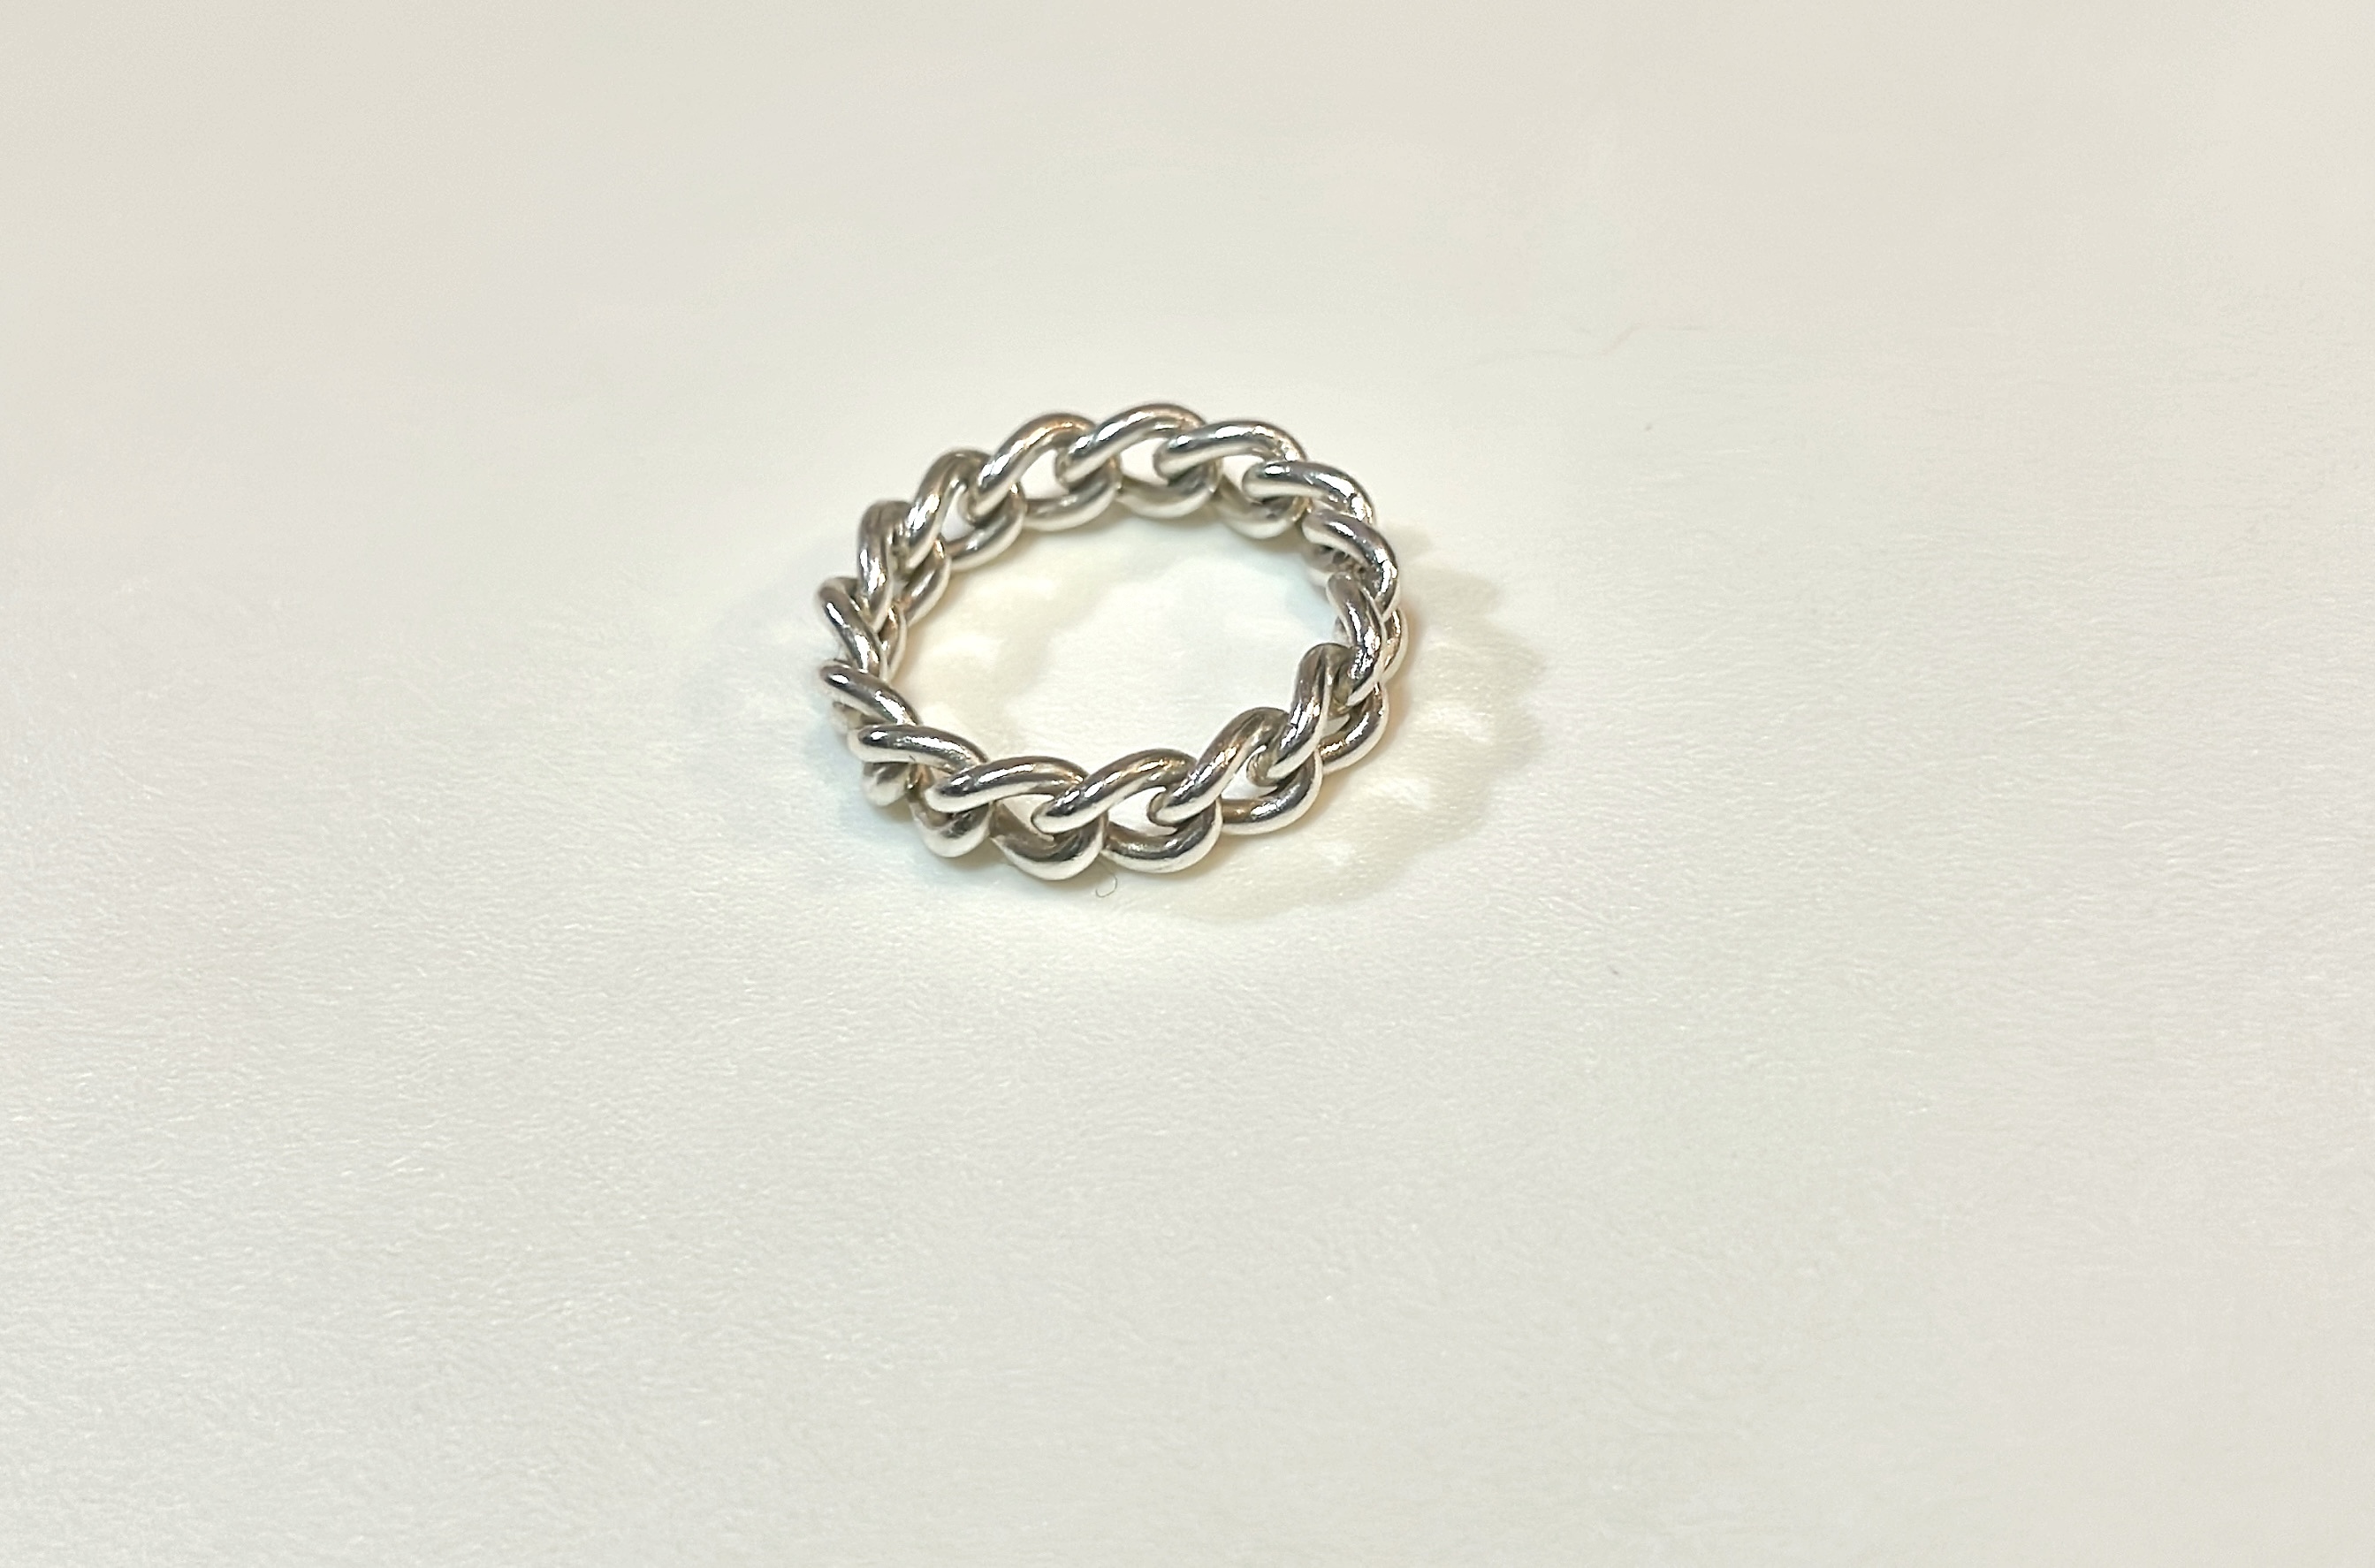 Chain ring 4mm